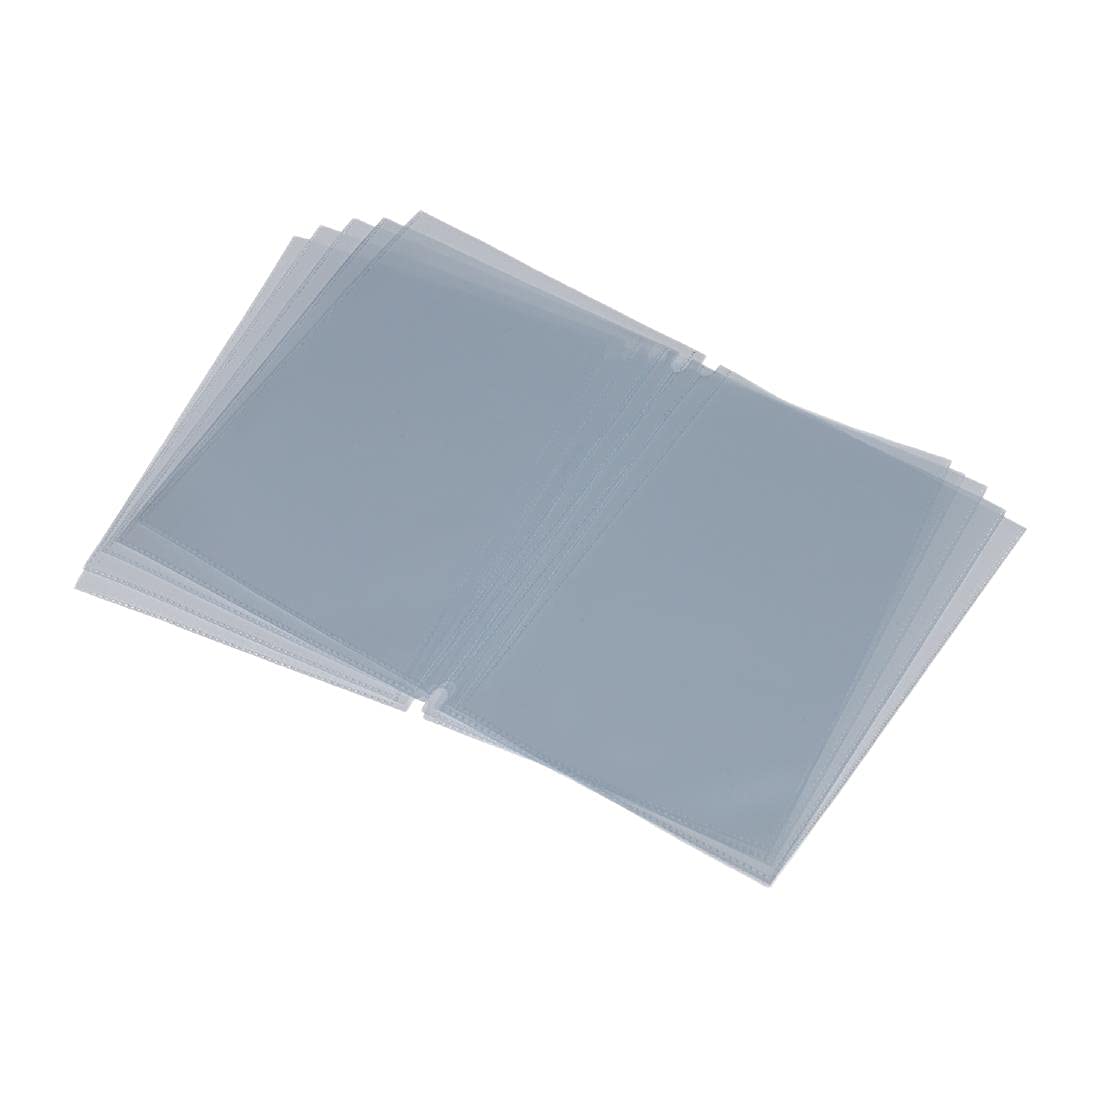 Securit A4 Plastic Inserts for Restaurant Menu Holders 10 Pack RRP 17.99 CLEARANCE XL 12.99